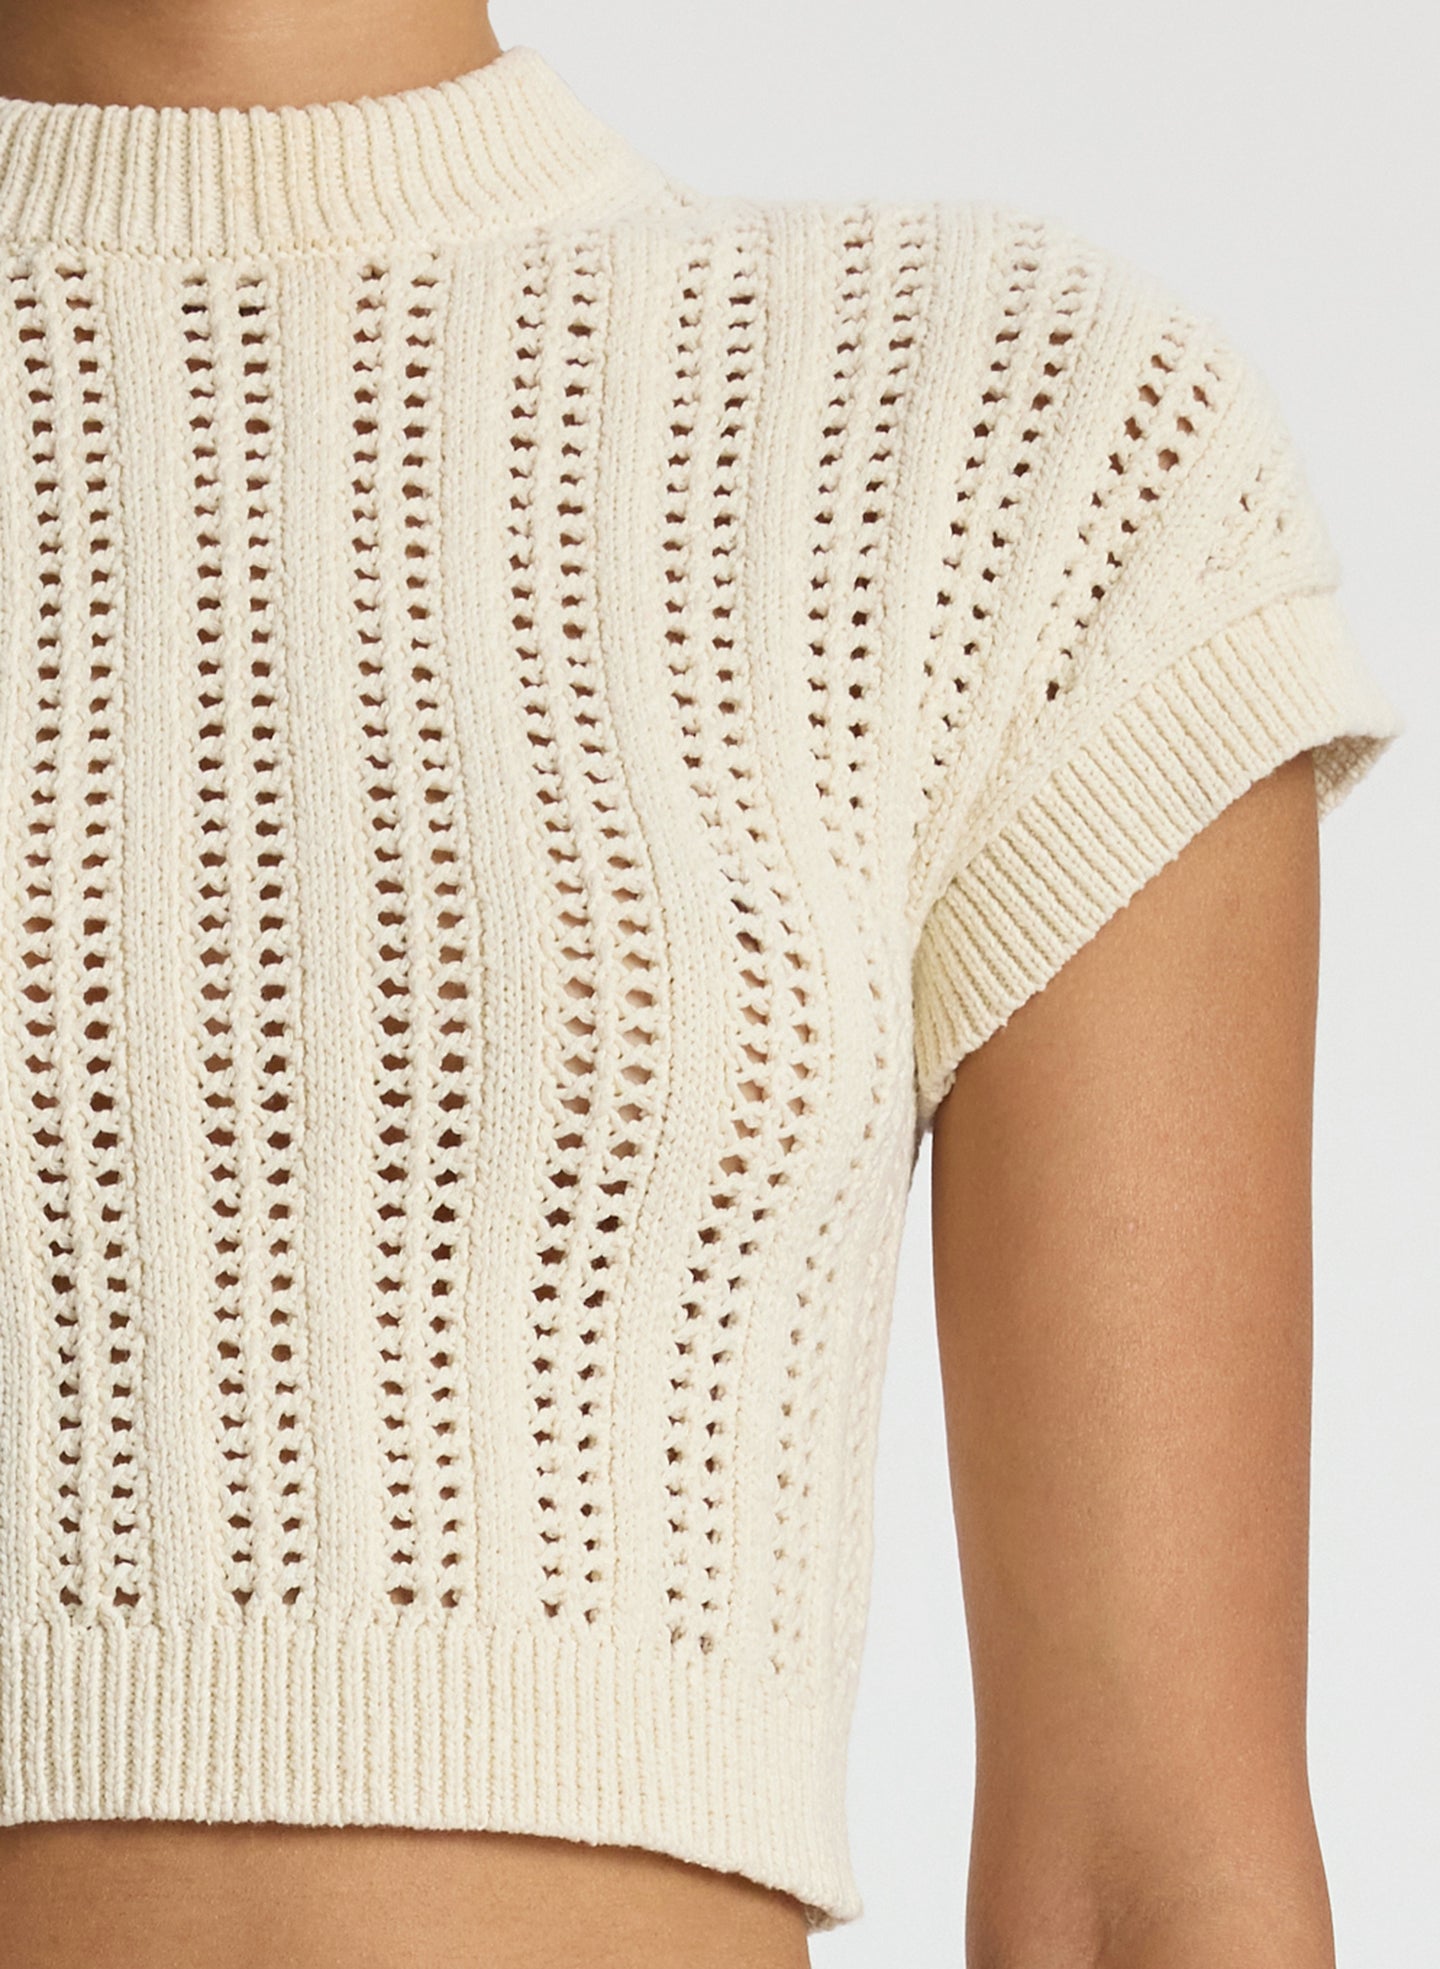 detail view of woman wearing ivory short sleeve open weave top and beige wide leg pants